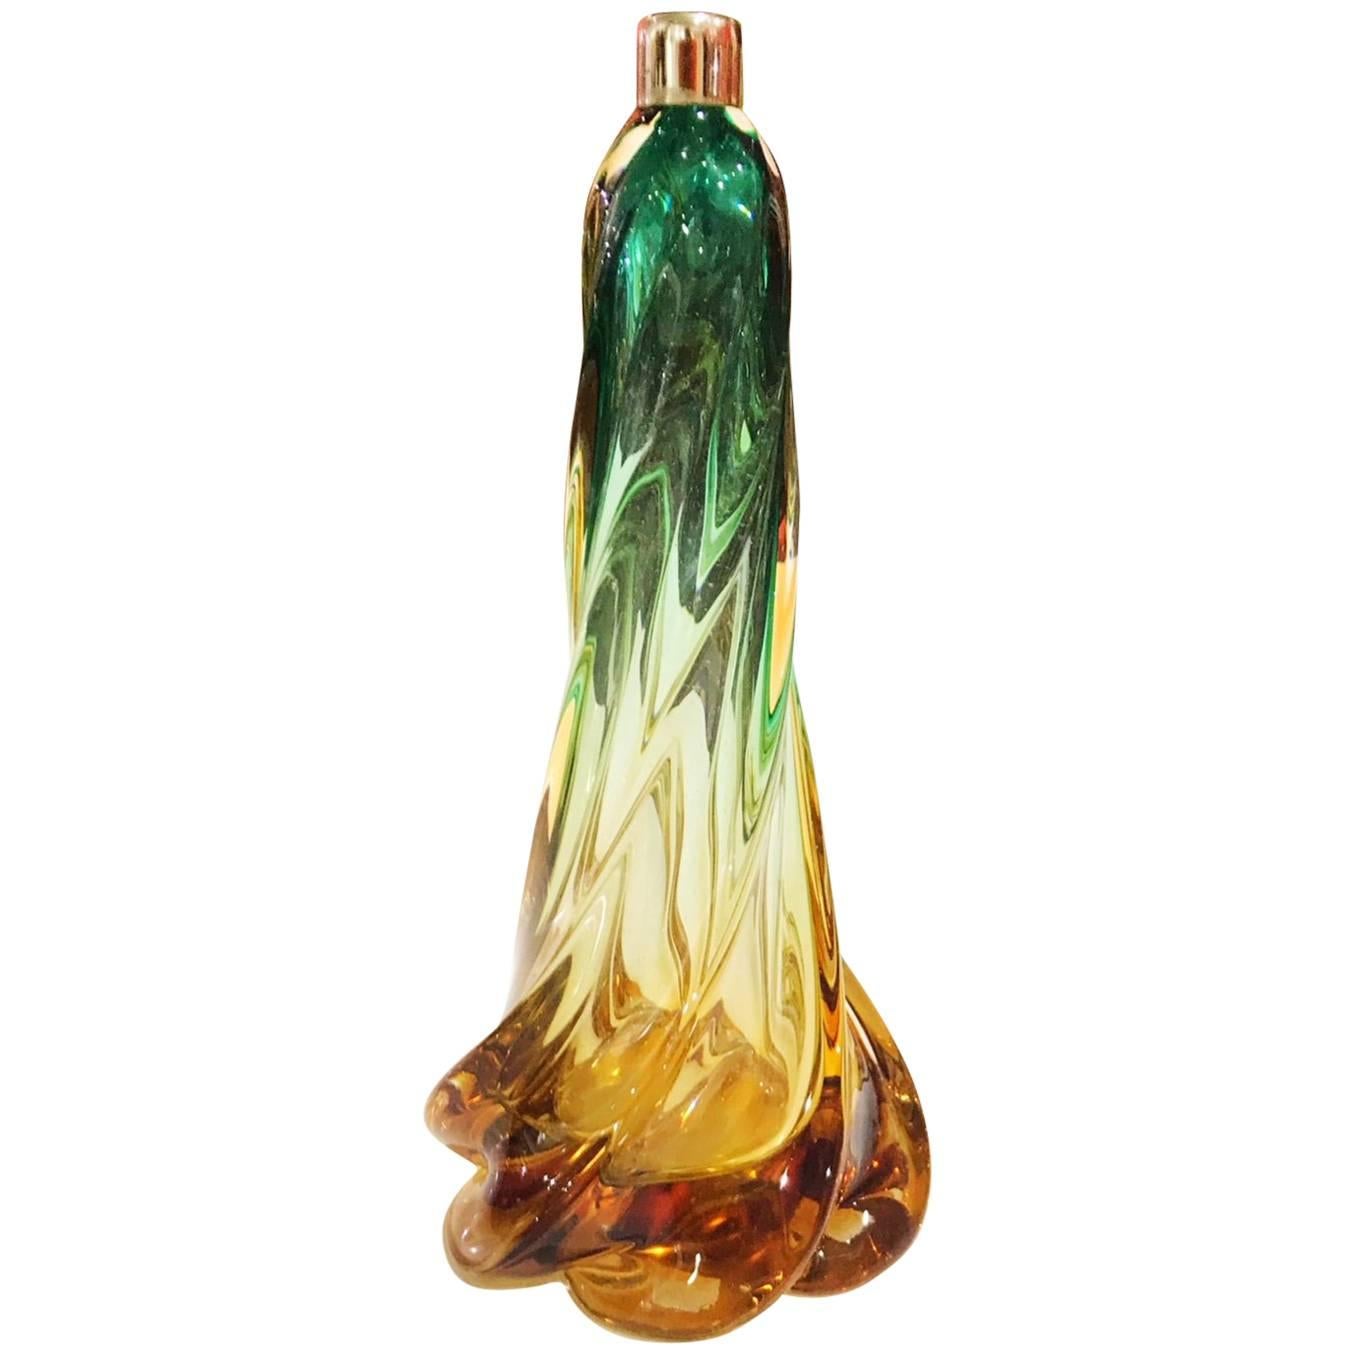 Barovier and Toso murano glass Table Lamp, 1940